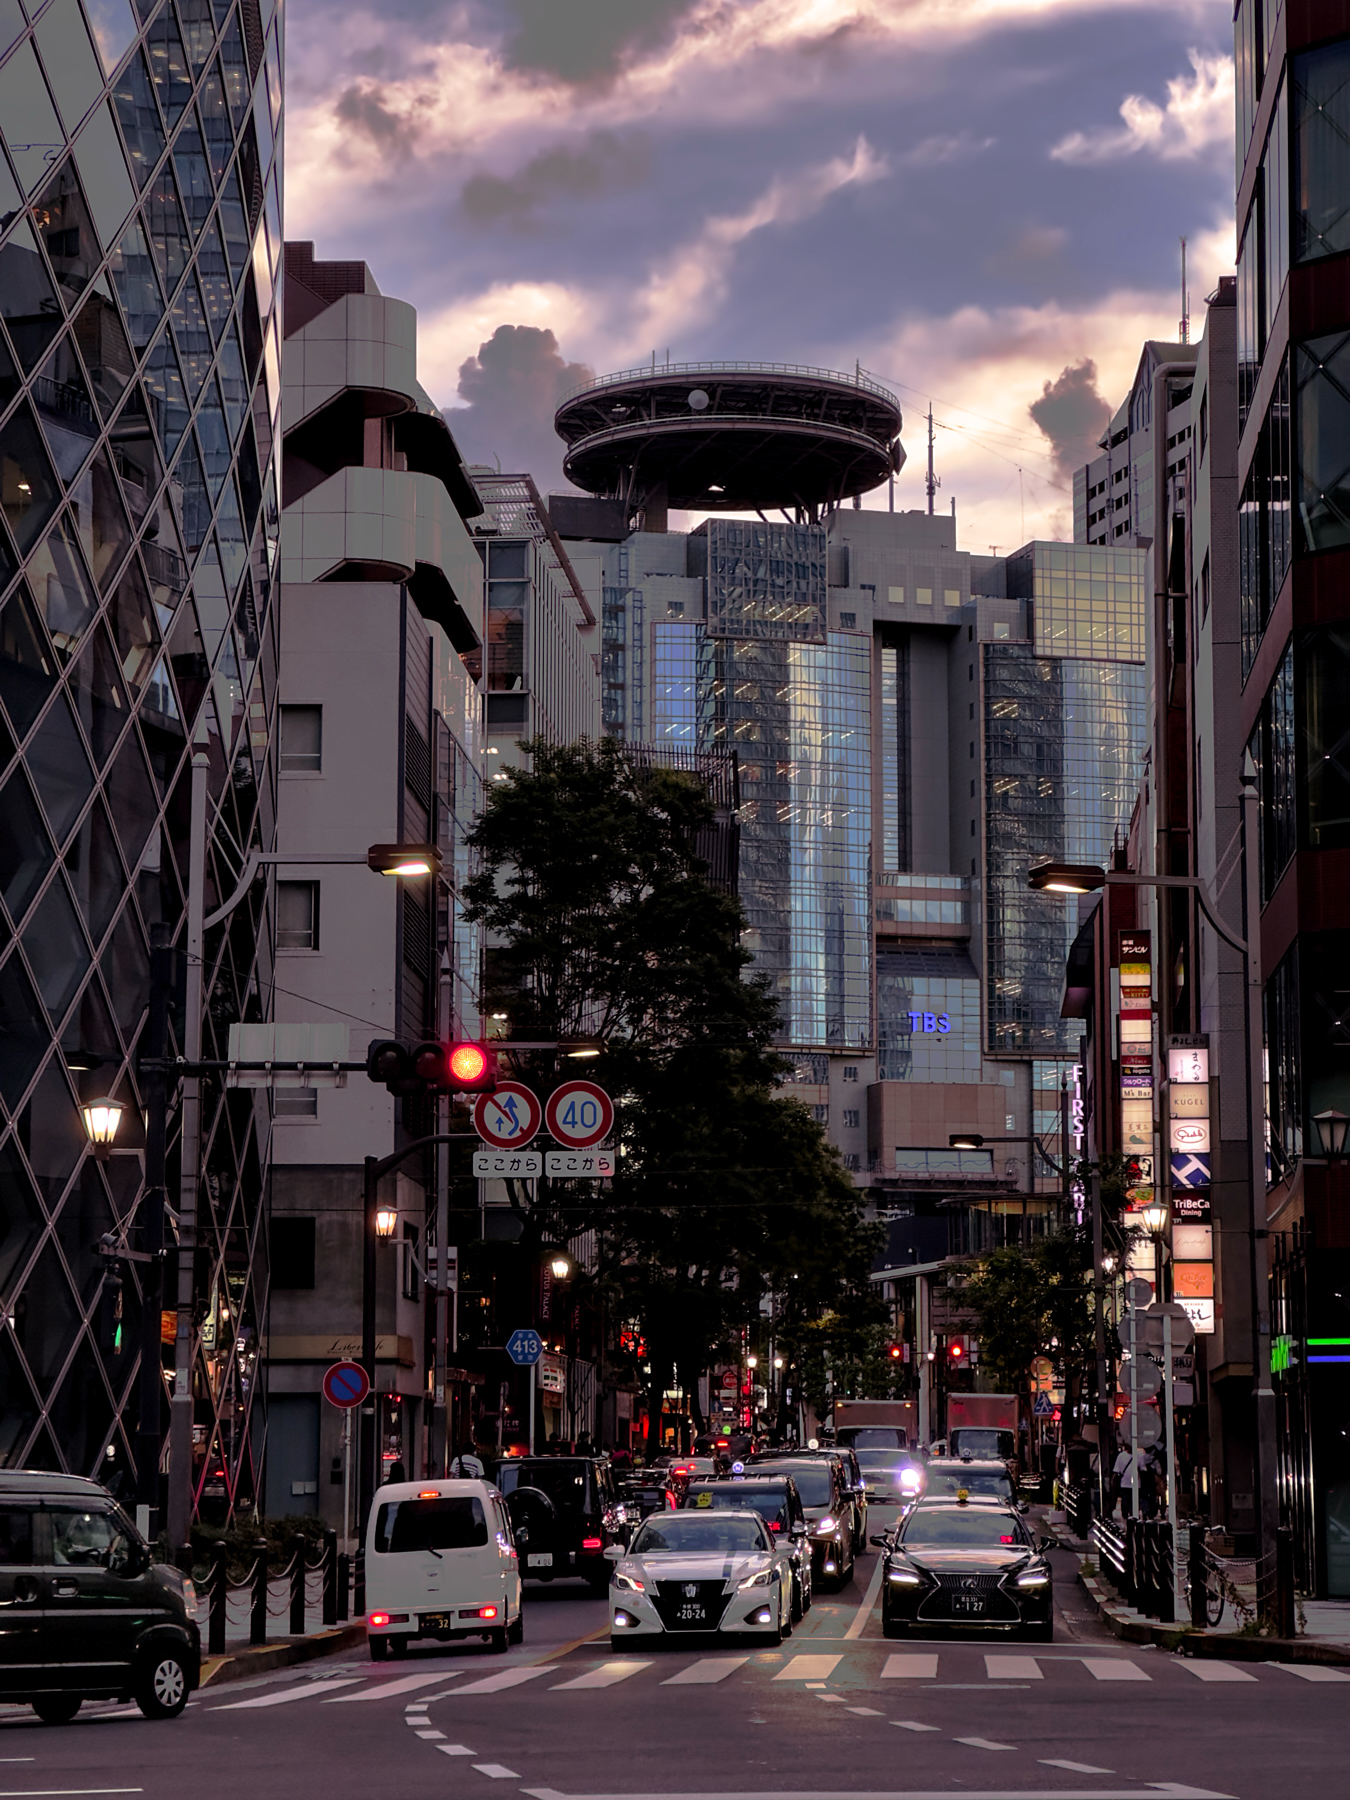 A portrait of a Tokyo street at sunset. Skyscrapers loom in the background with powerful looking clouds.